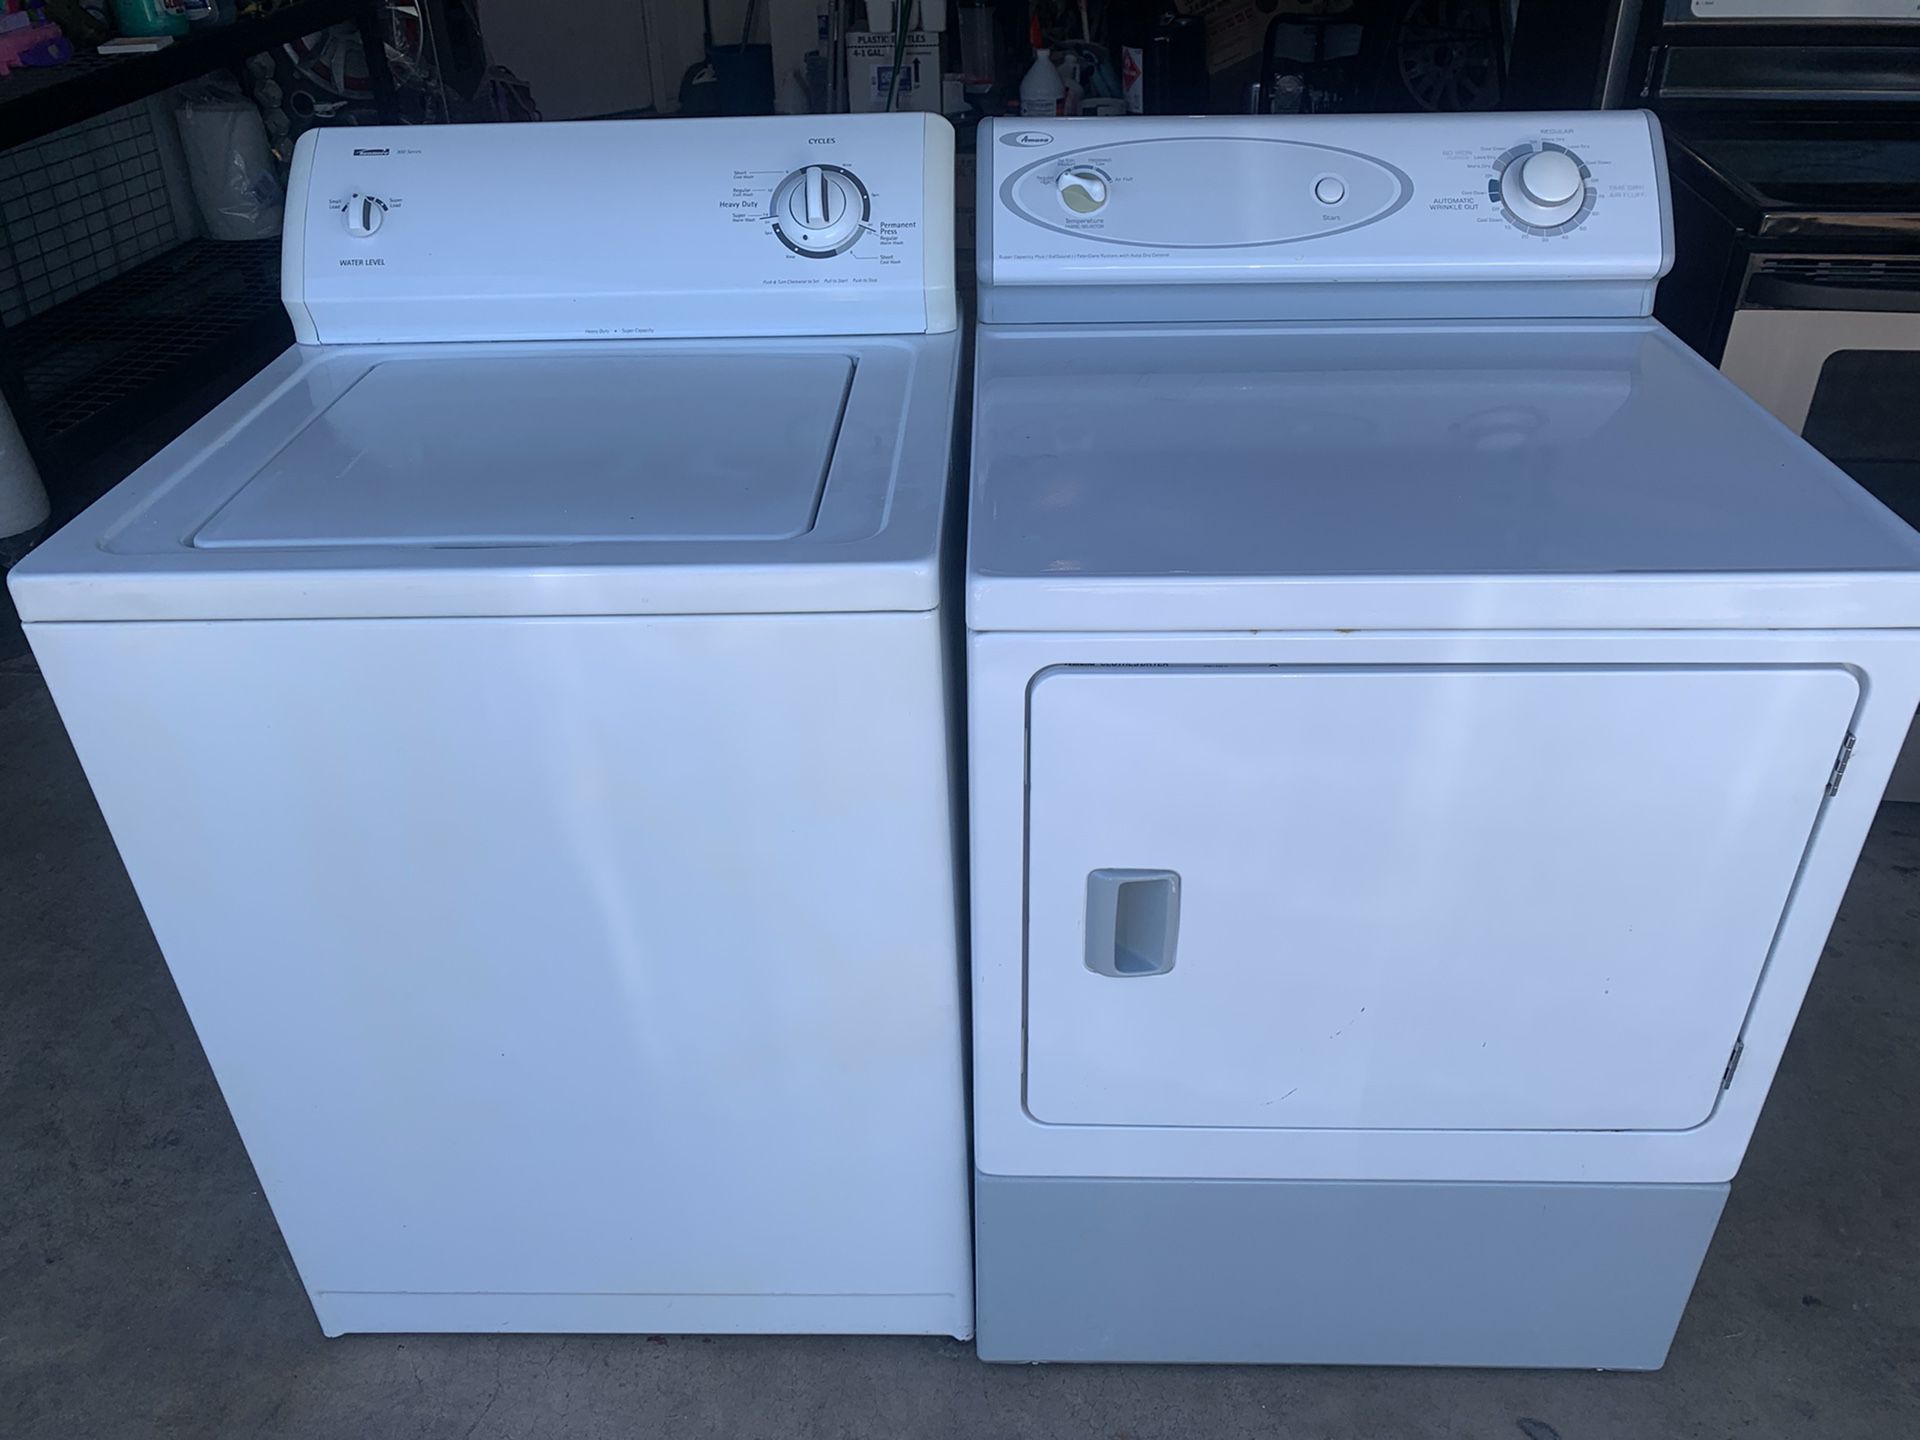 Kenmore washer Amana dryer electric